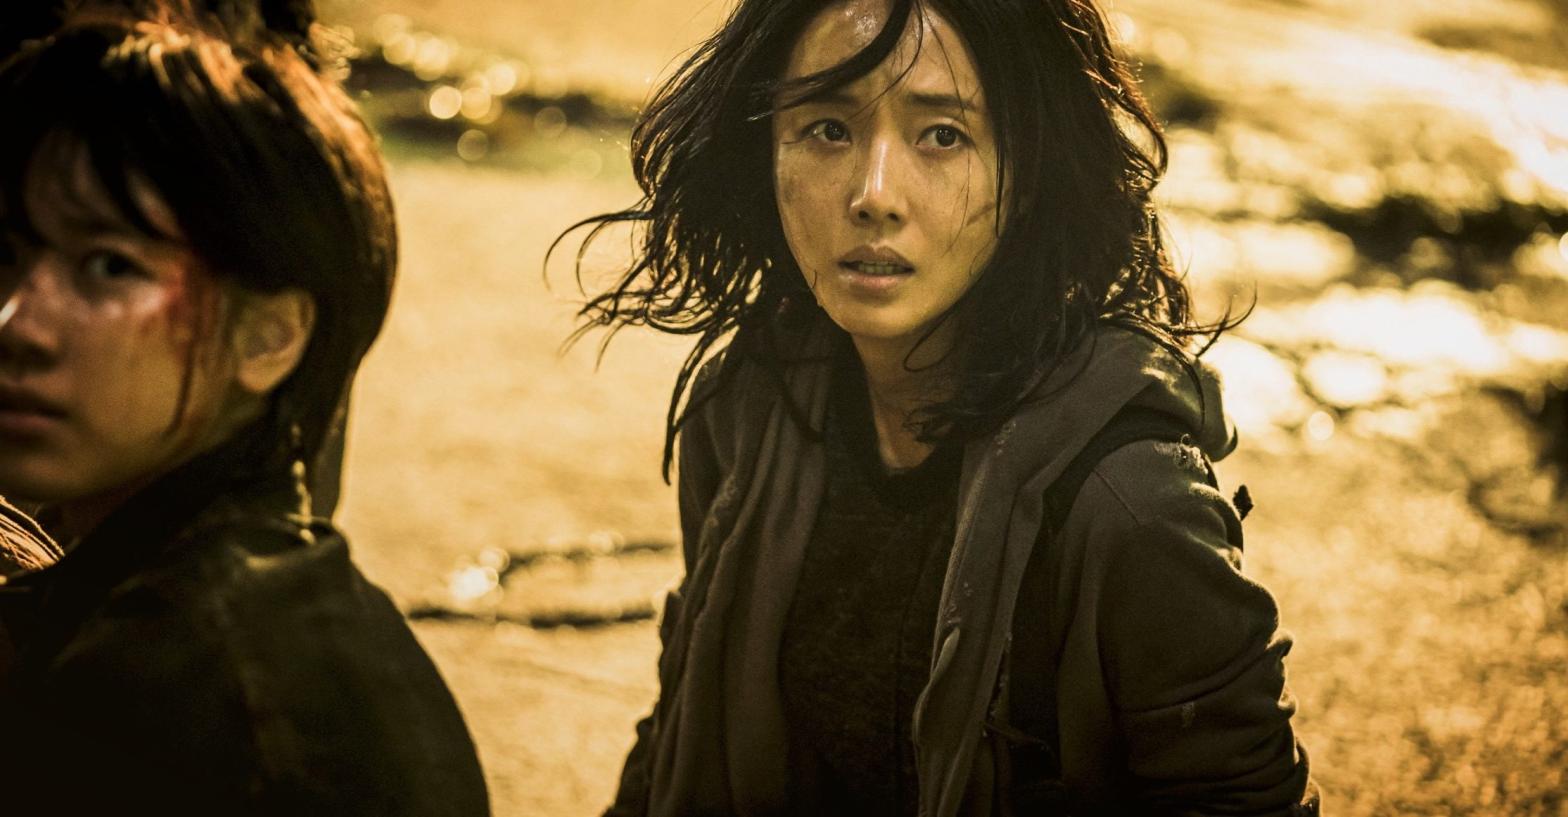 Min-jung (Lee Jung-hyun) is definitely the kind of zombie-fighting badass you'd want on your side. (Photo: Well Go USA)